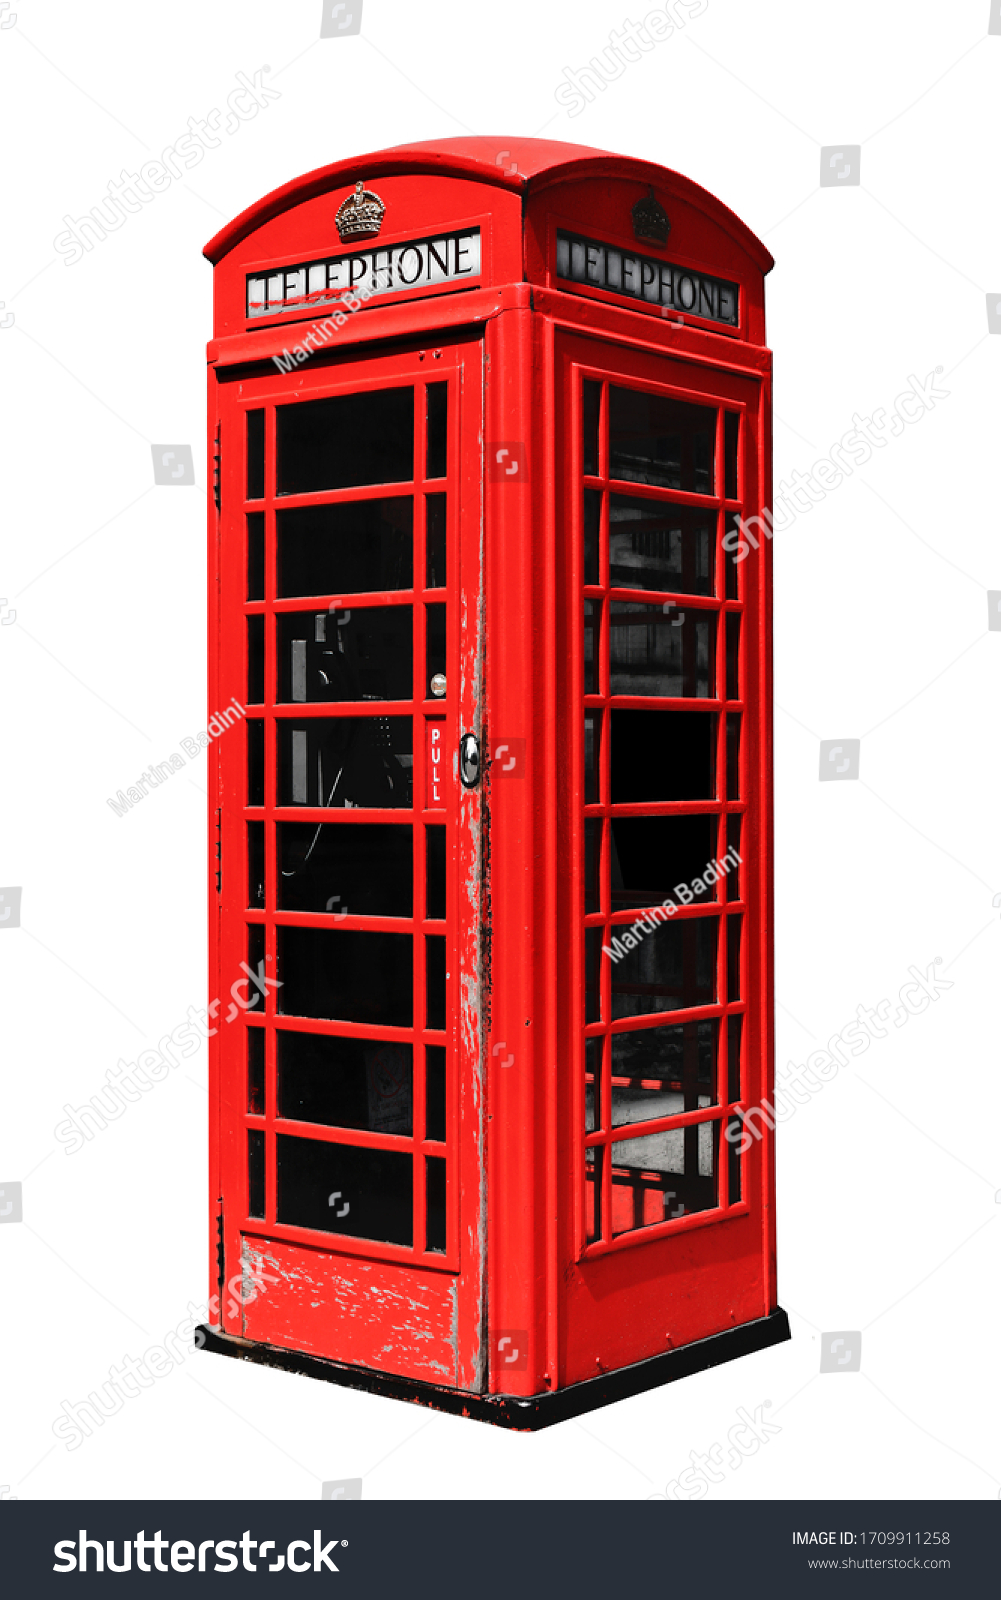 Red telephone box in London isolated on white background #1709911258